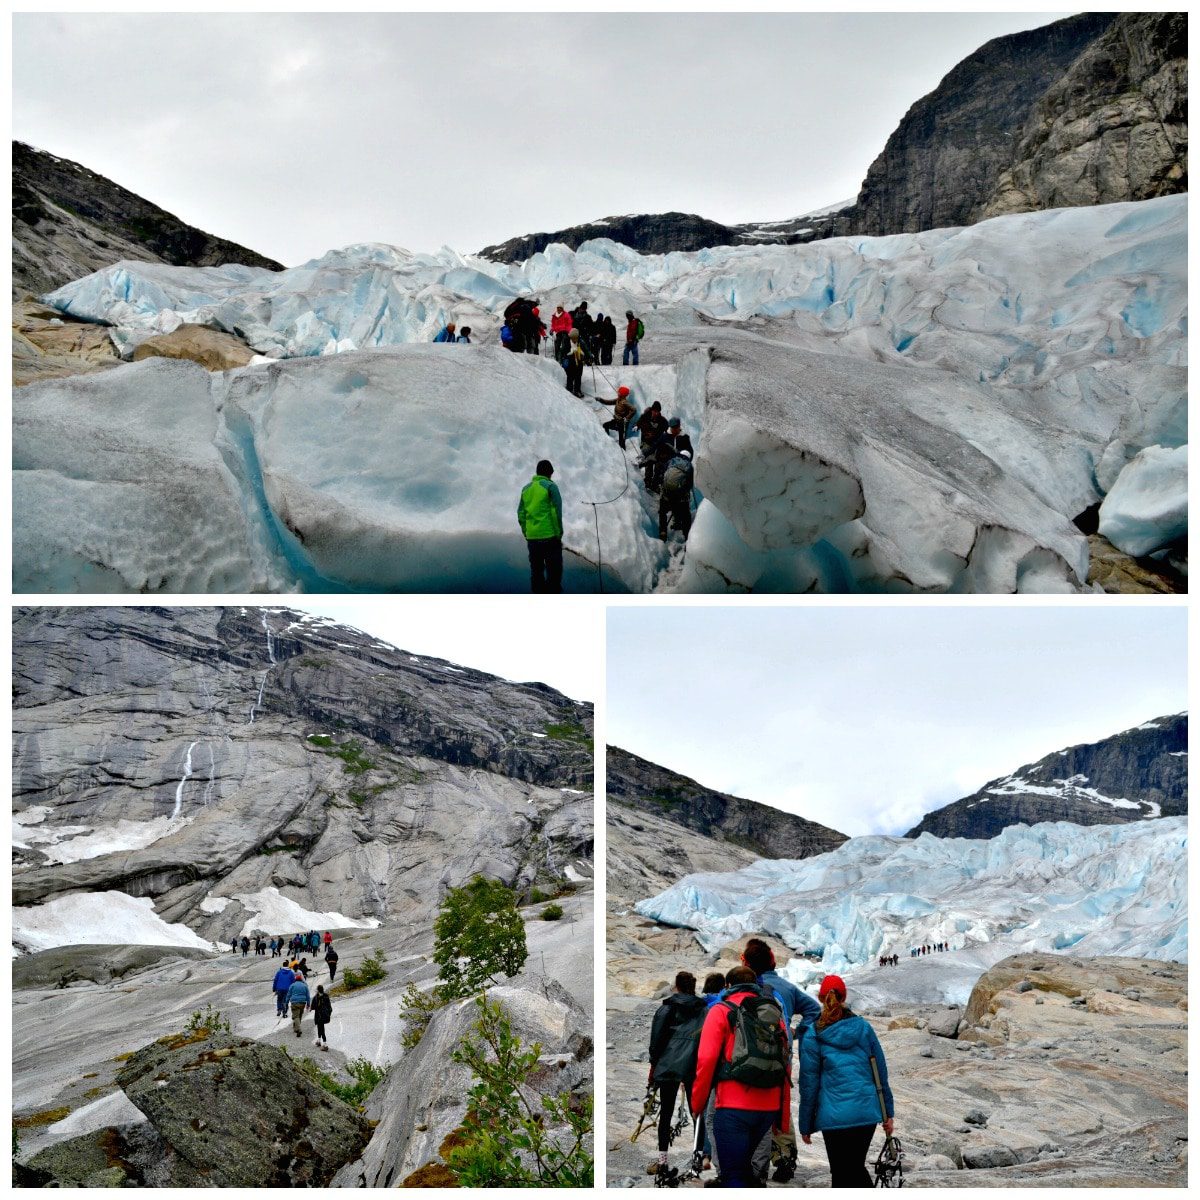 The start of the hike over rocks and up ice stairs